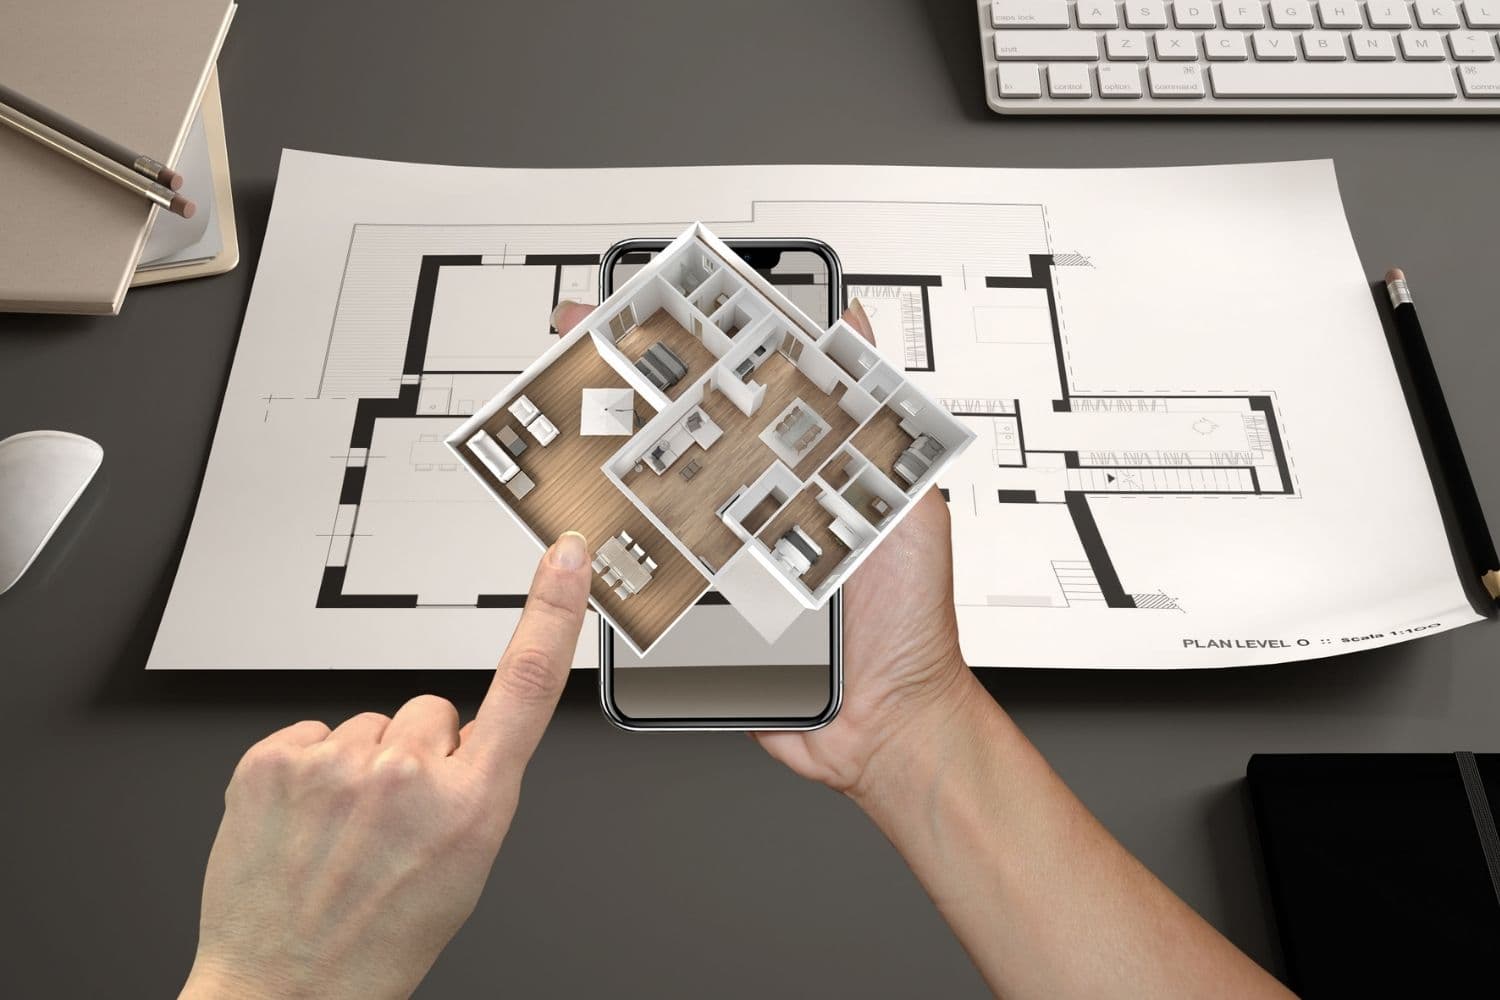 Augmented reality in architectural design